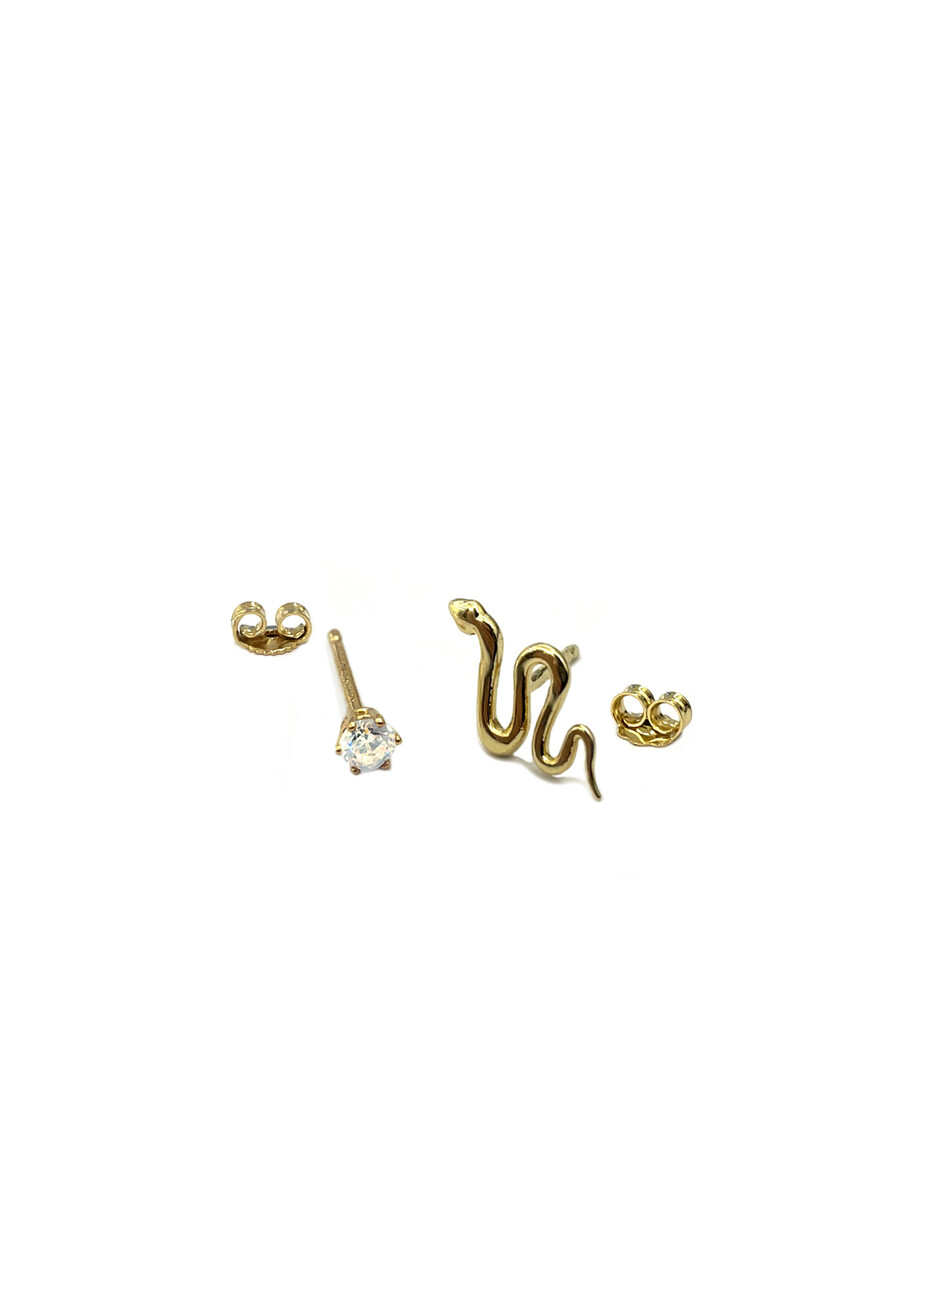 Snake and zirconia stud earrings in 18kt solid gold